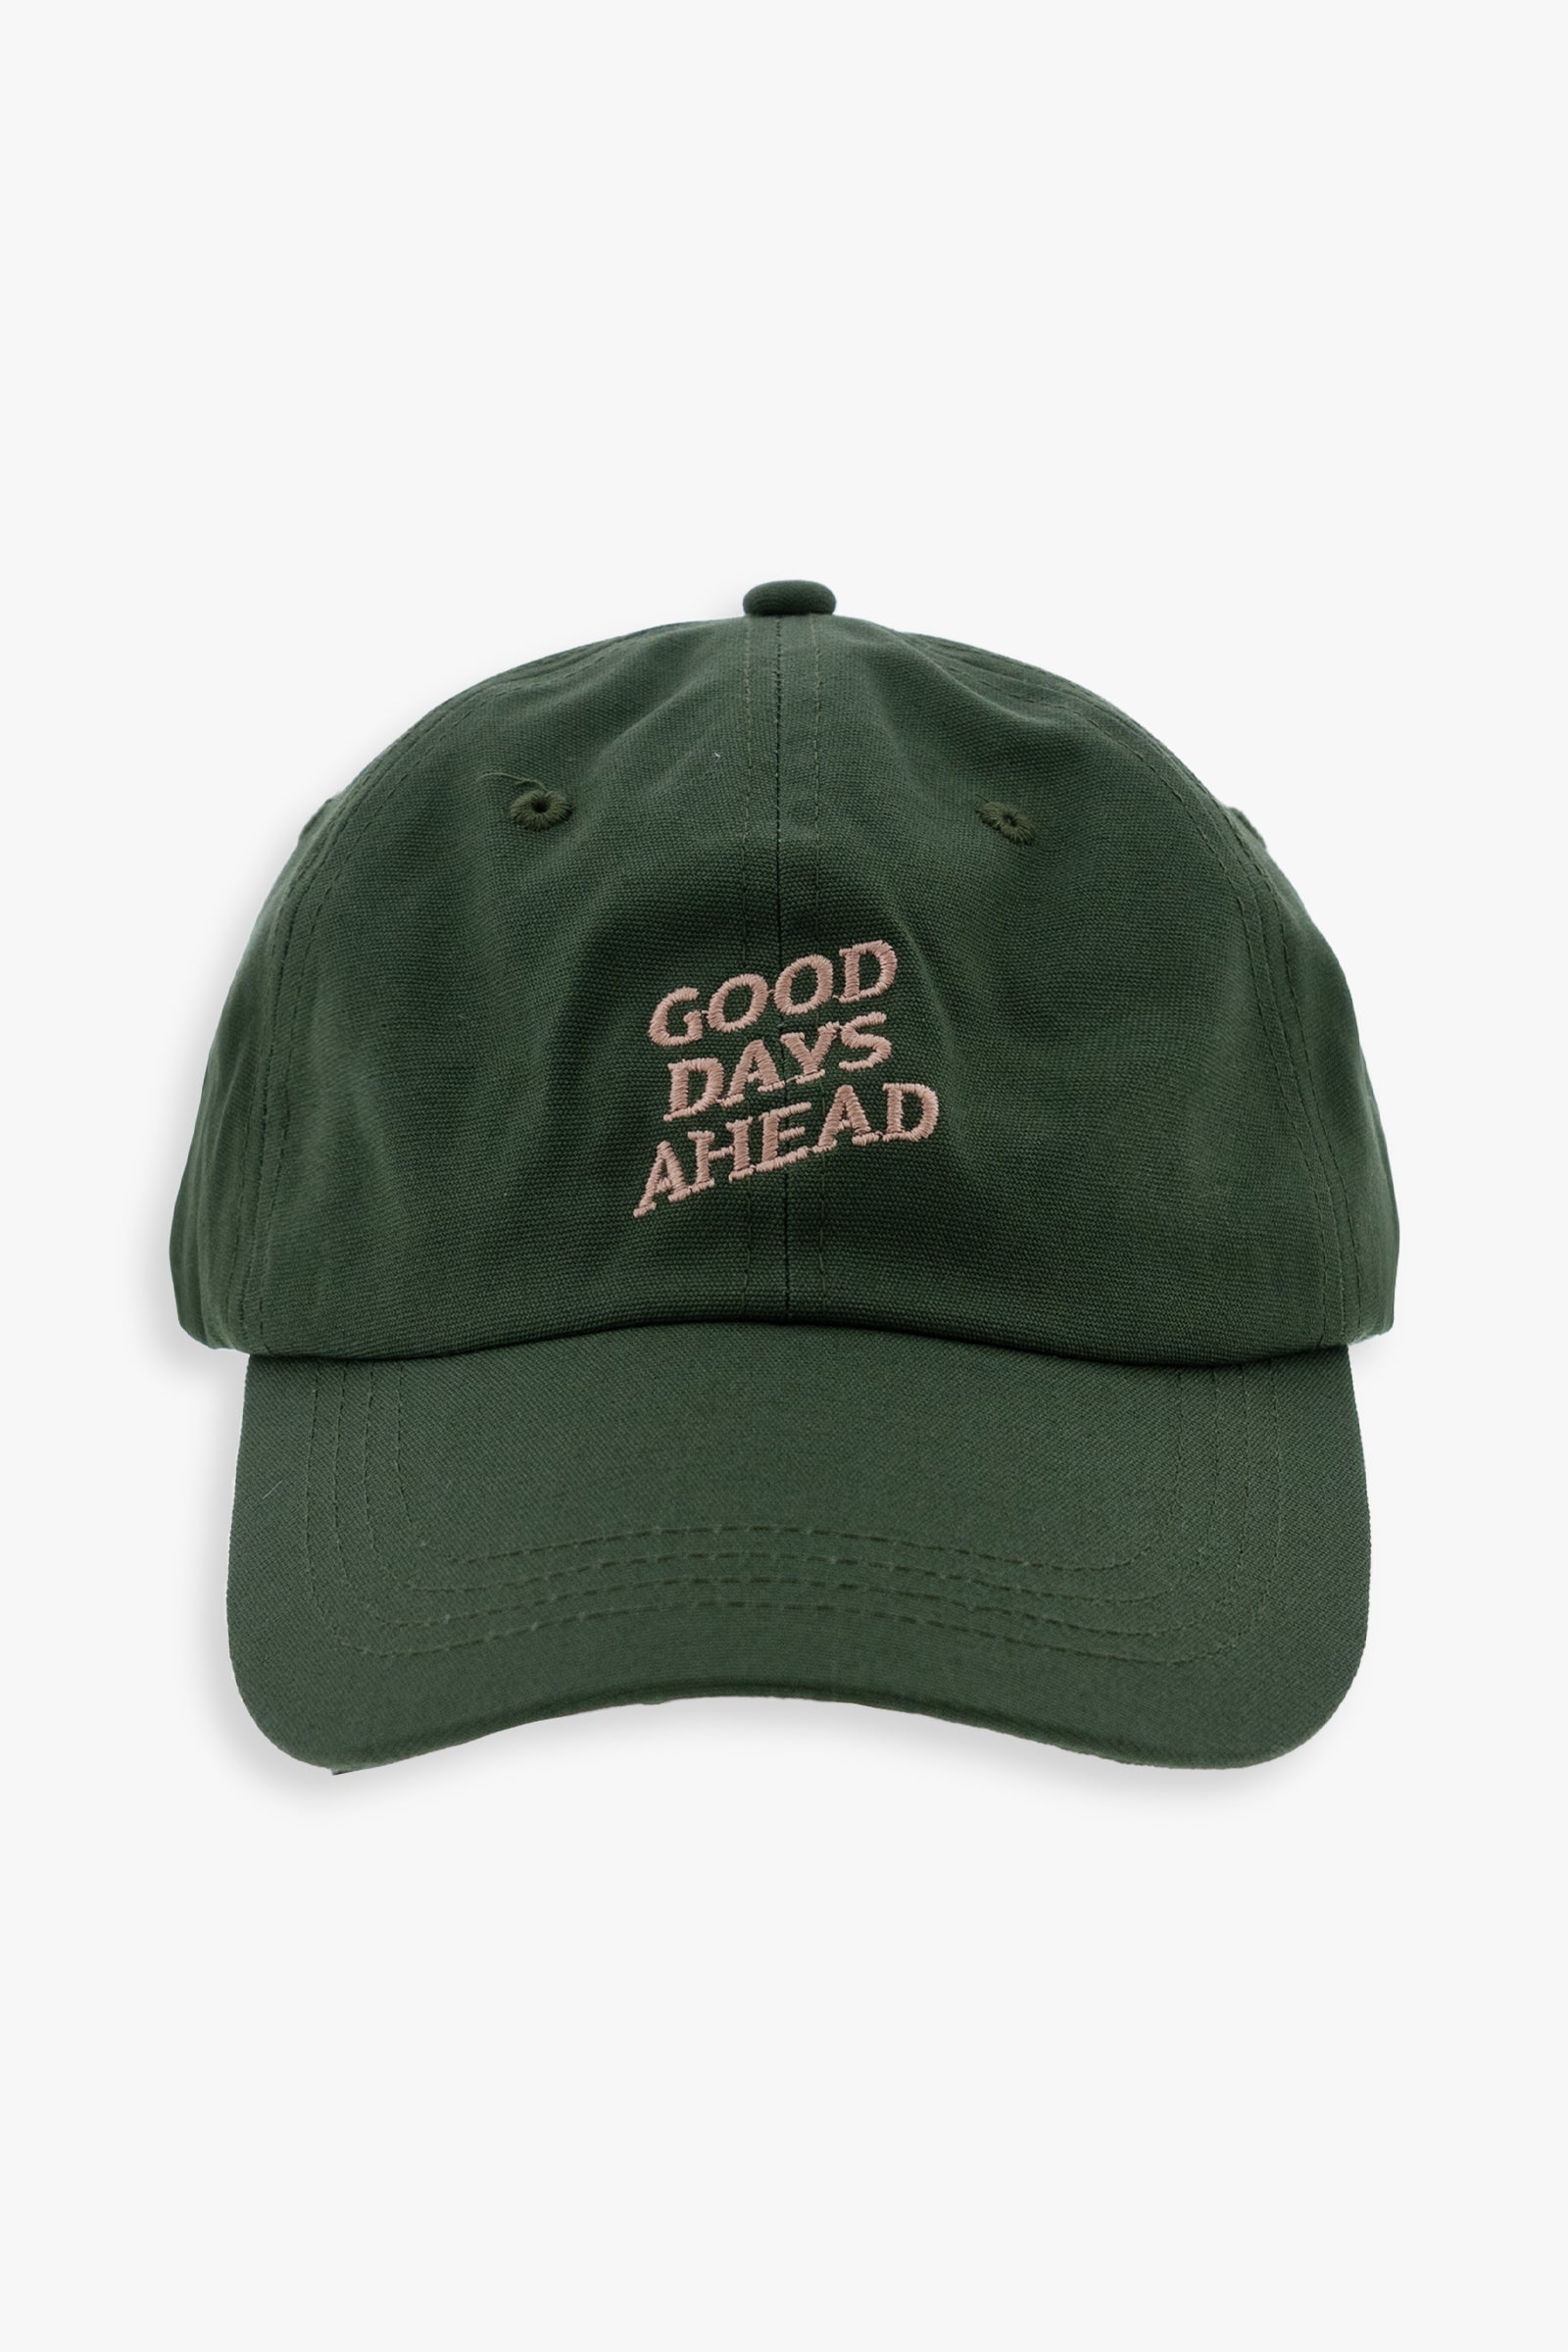 Adult Unisex Dad Cap With Embroidery